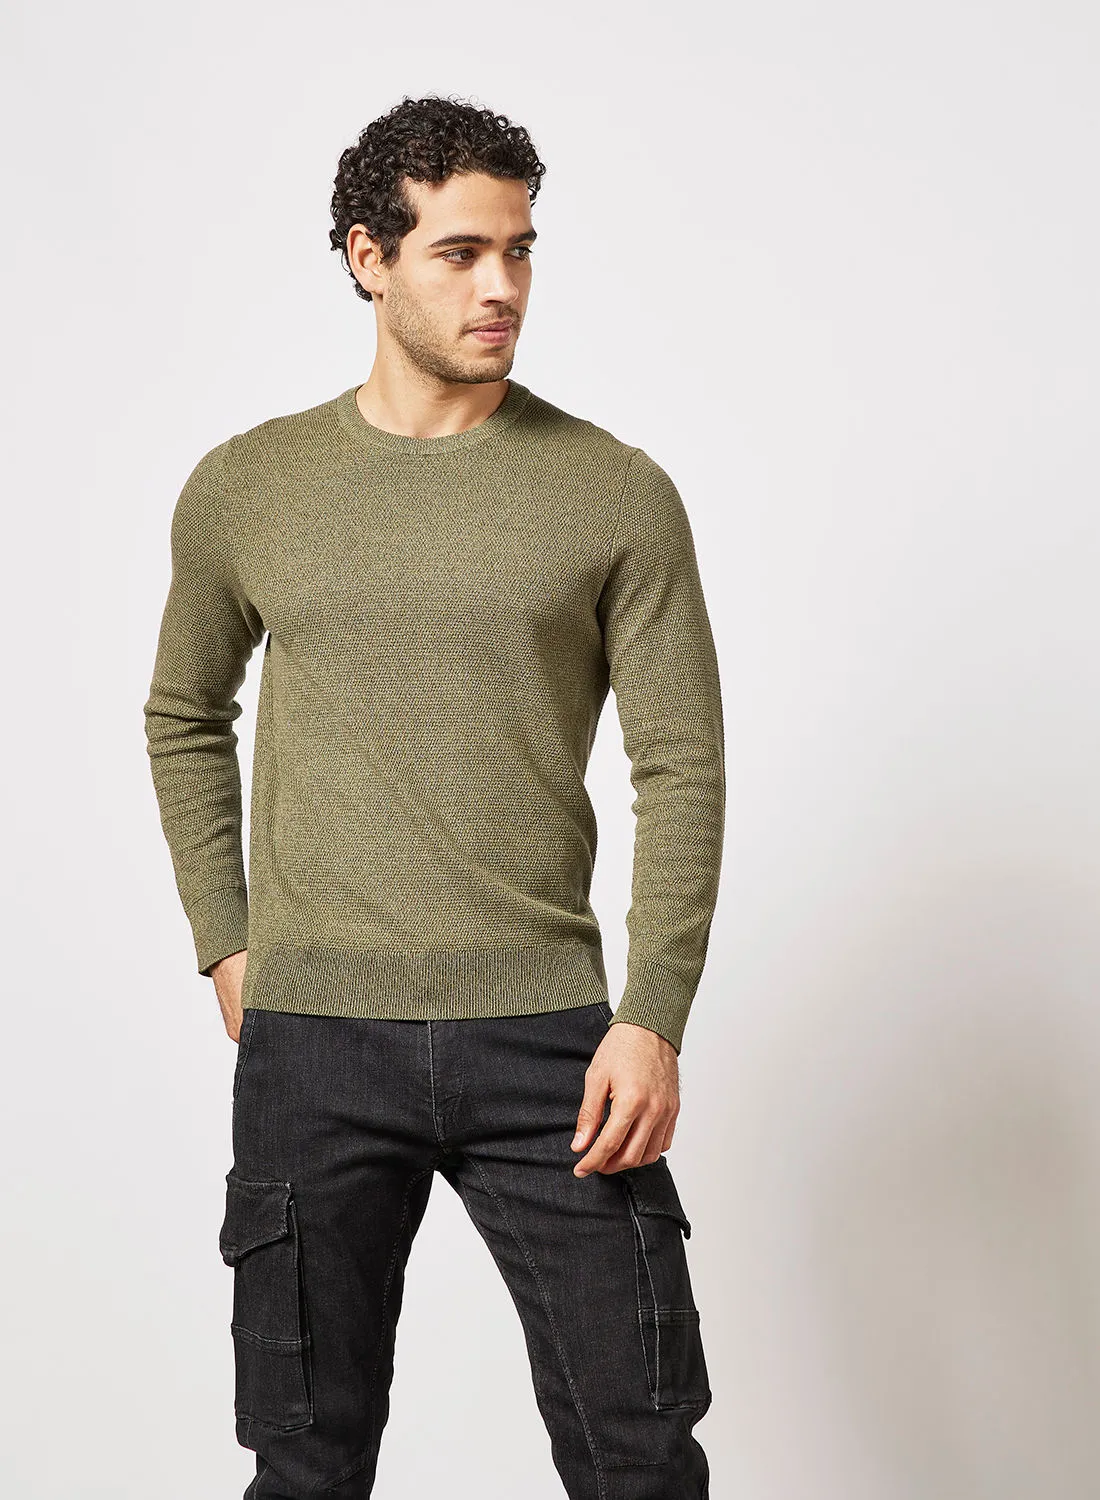 Red Tape Casual Men's Long Sleeve Cotton Sweater Olive